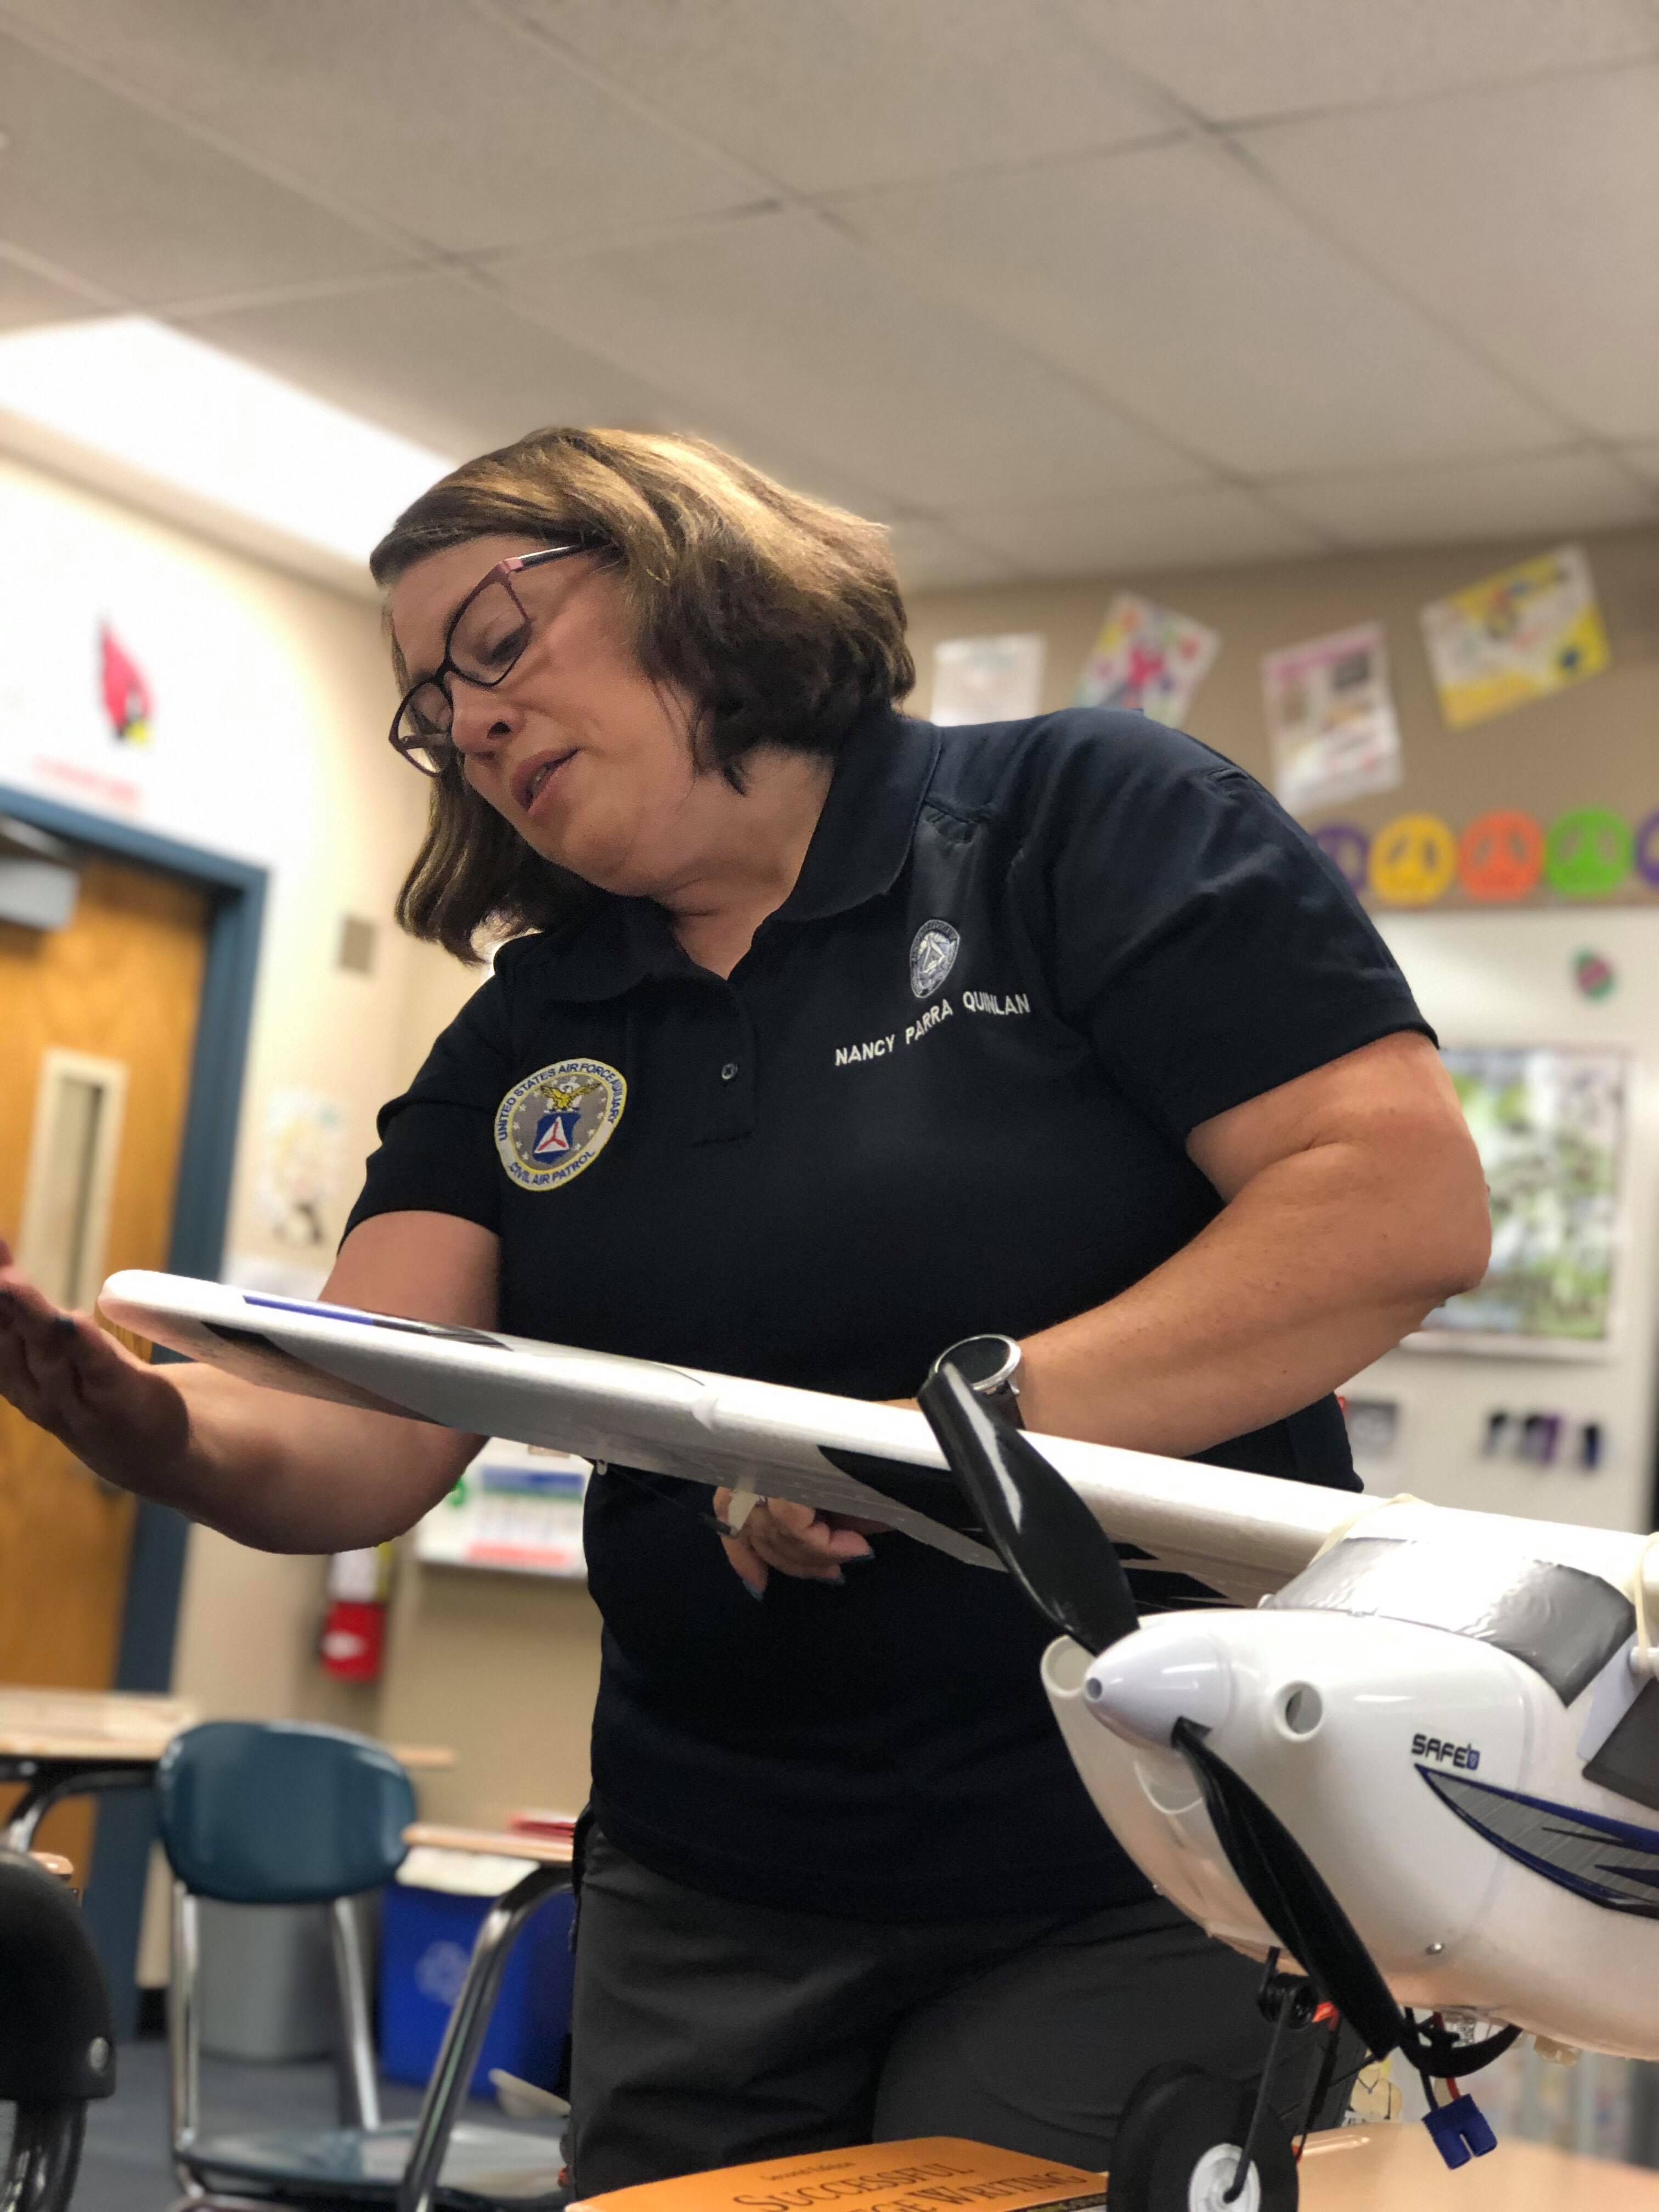 Capt. nancy Parra-Quinlan works in her classroom with an remote control model plane